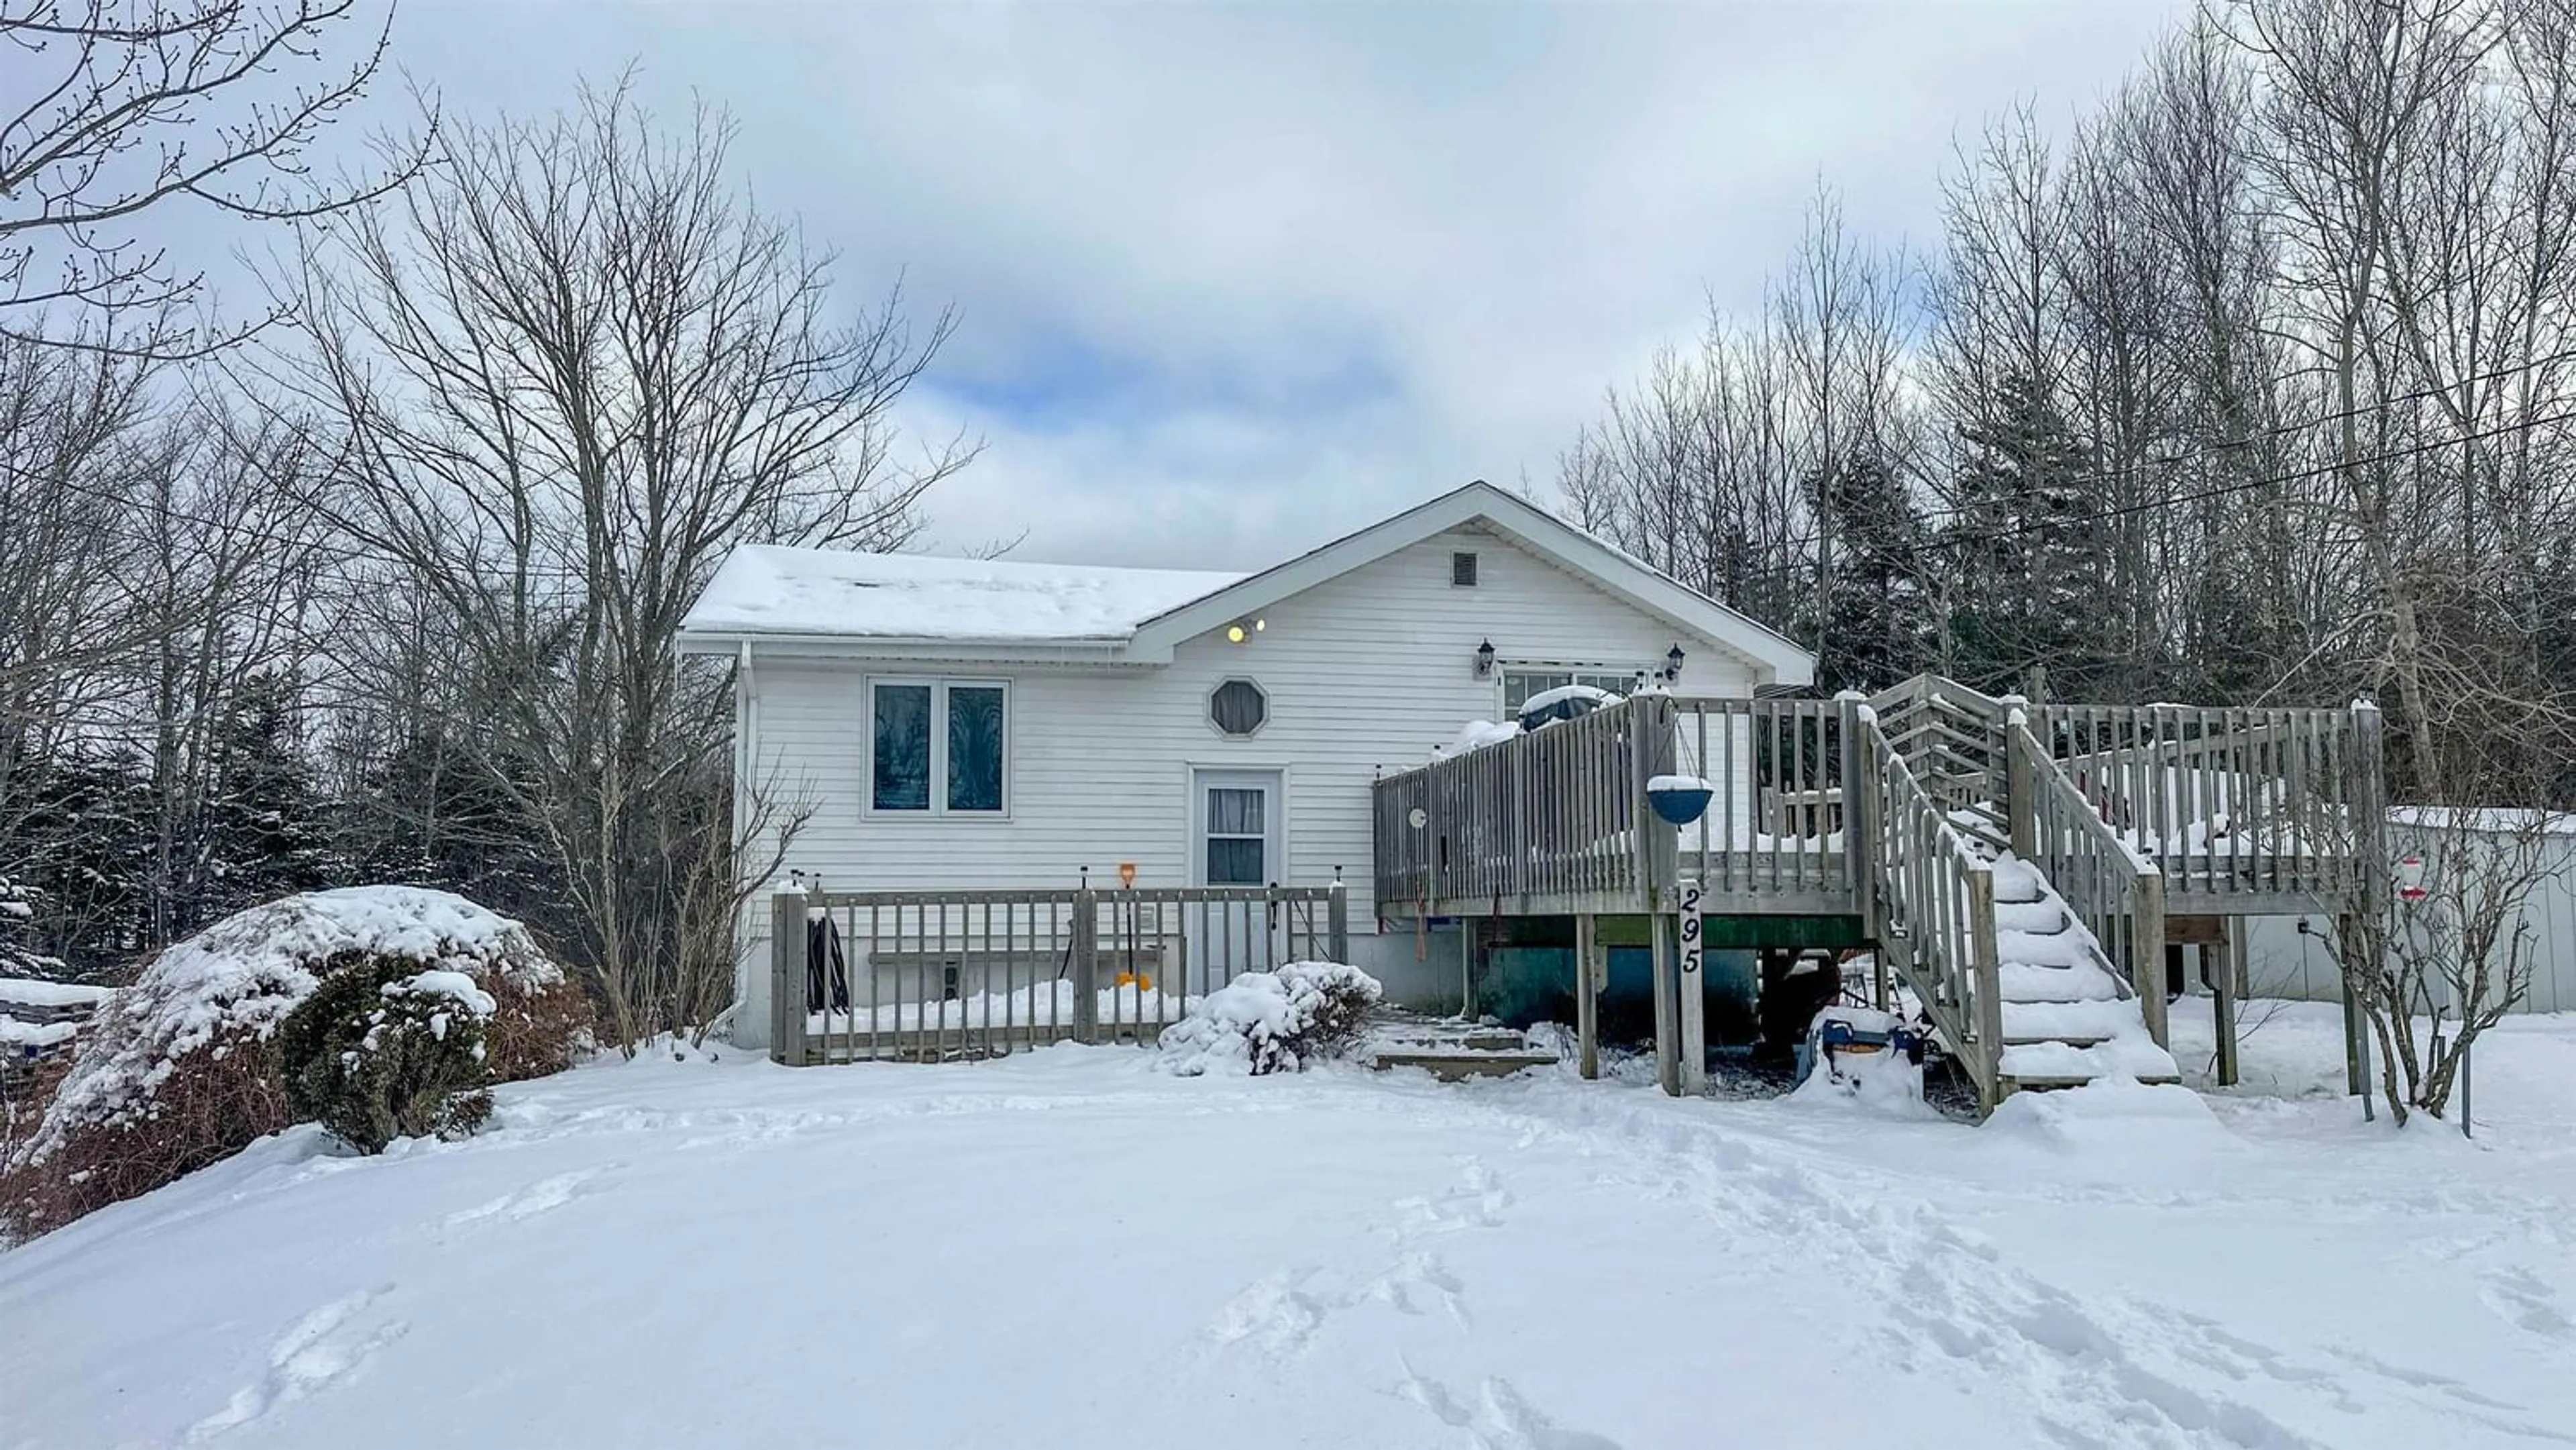 Home with unknown exterior material for 295 Harmony Rd, Salmon River Nova Scotia B6L 3P9